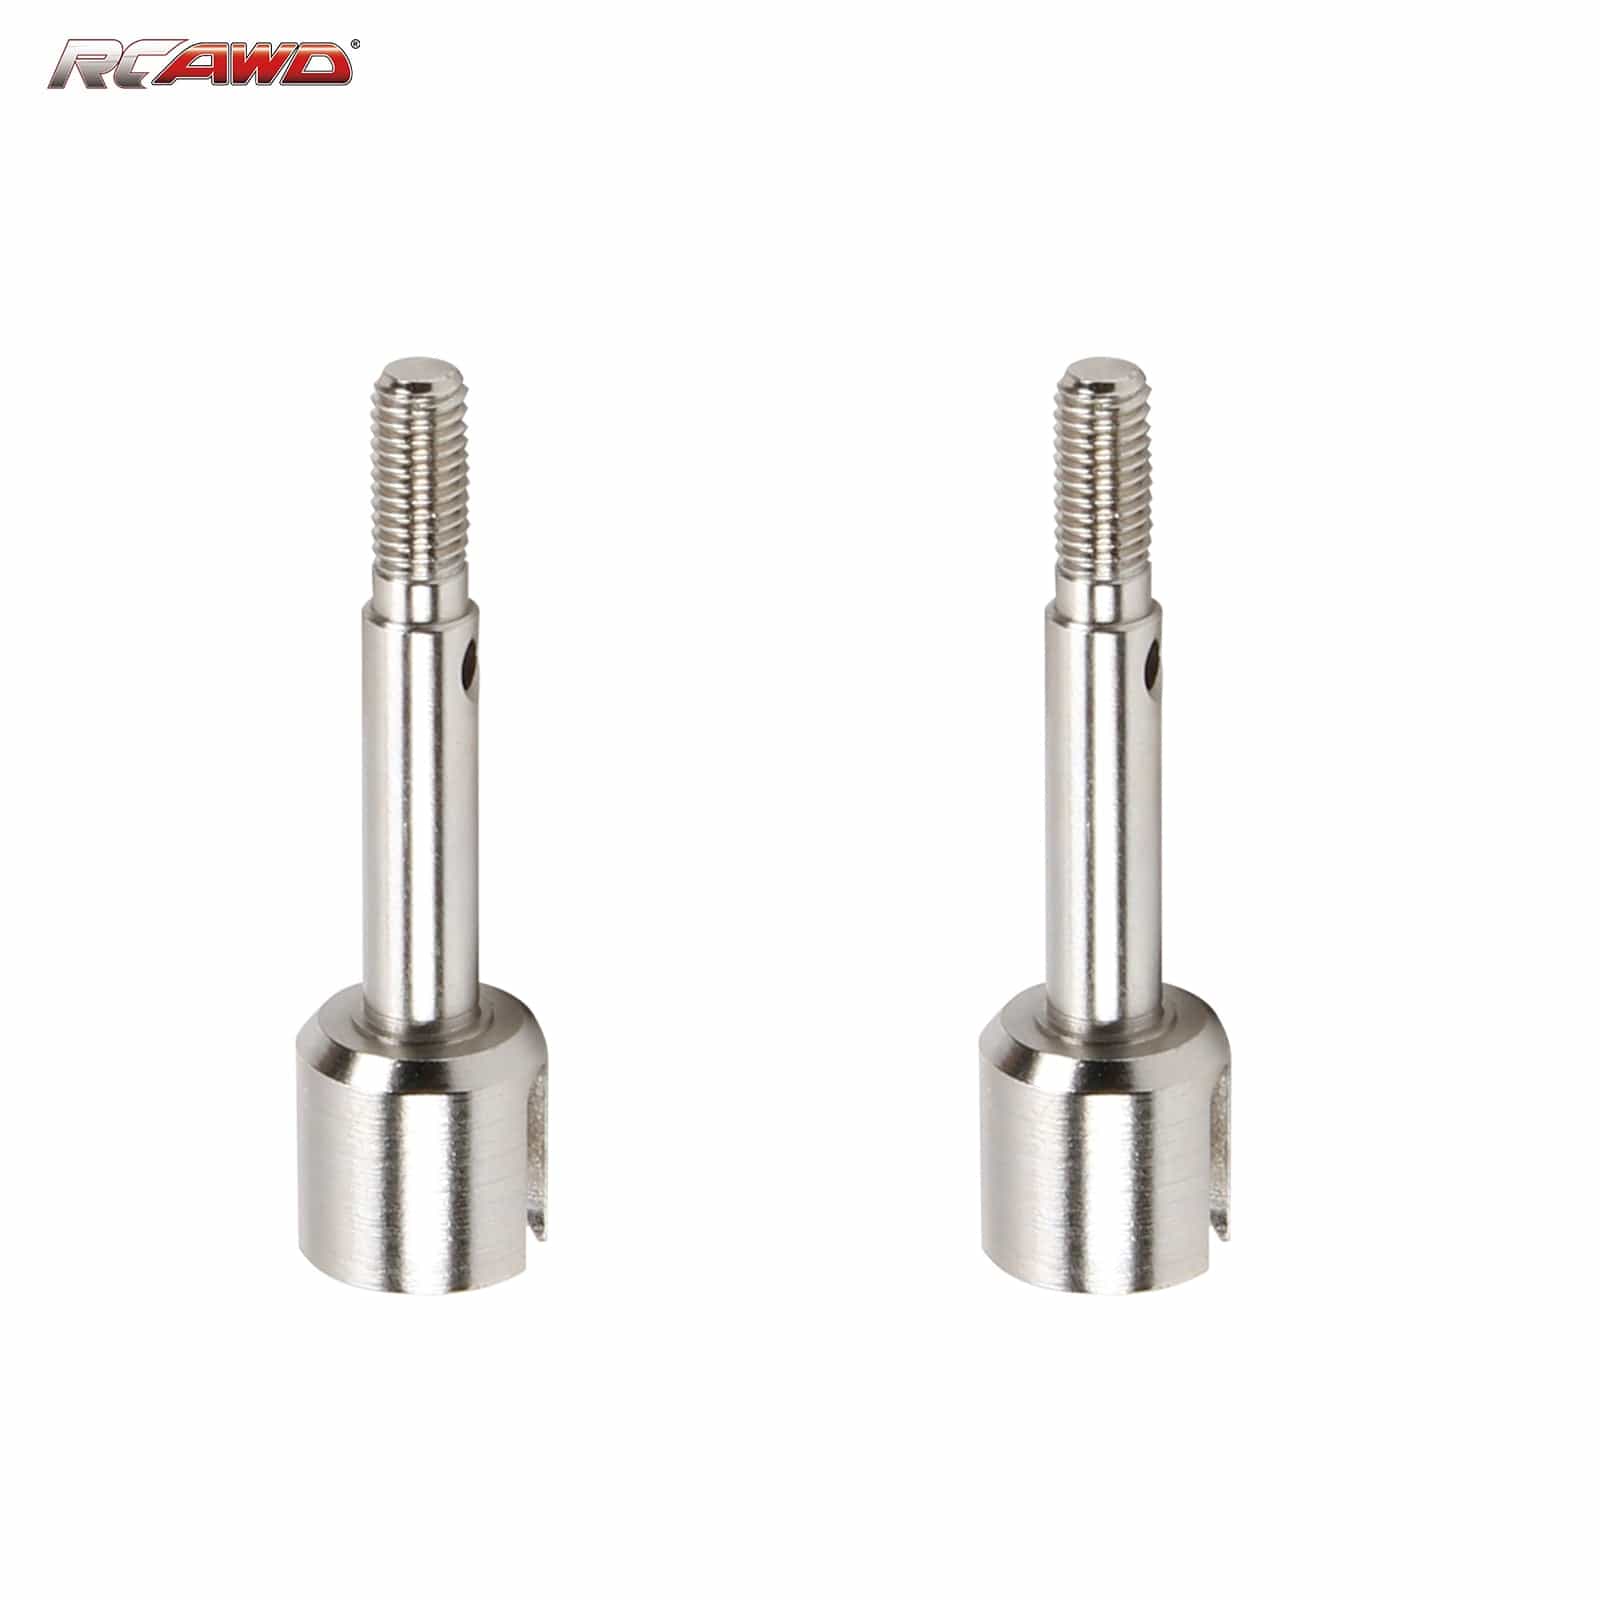 RCAWD Silver 2pcs/set #45 rear Rear Stub Axle for 1-8 Losi LMT RC car Upgrded part